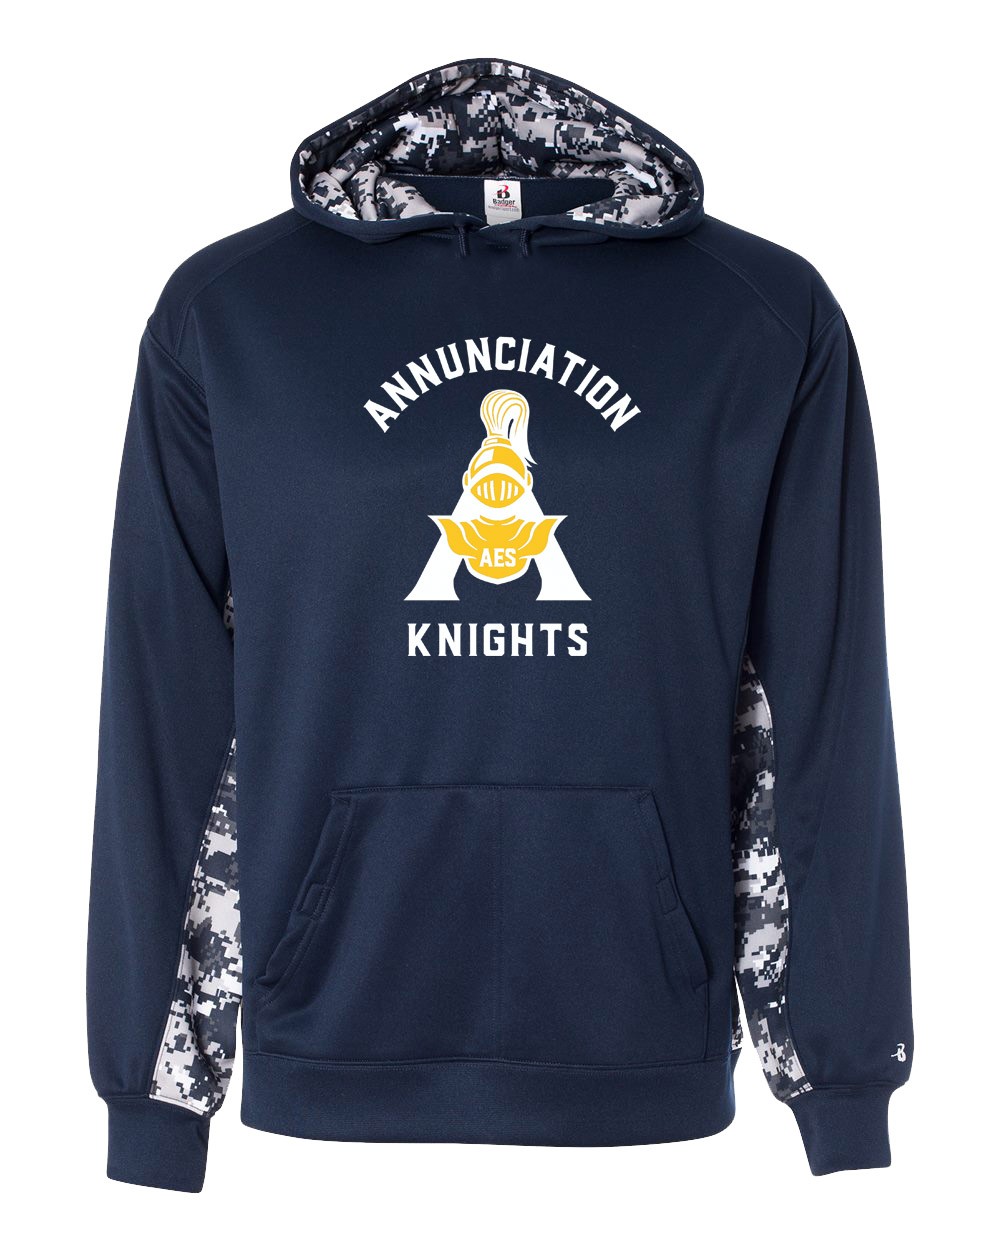 ANN Spirit Digital Color Block Hoodie w/ Large AES Logo - Please Allow 2-3 Weeks for Delivery